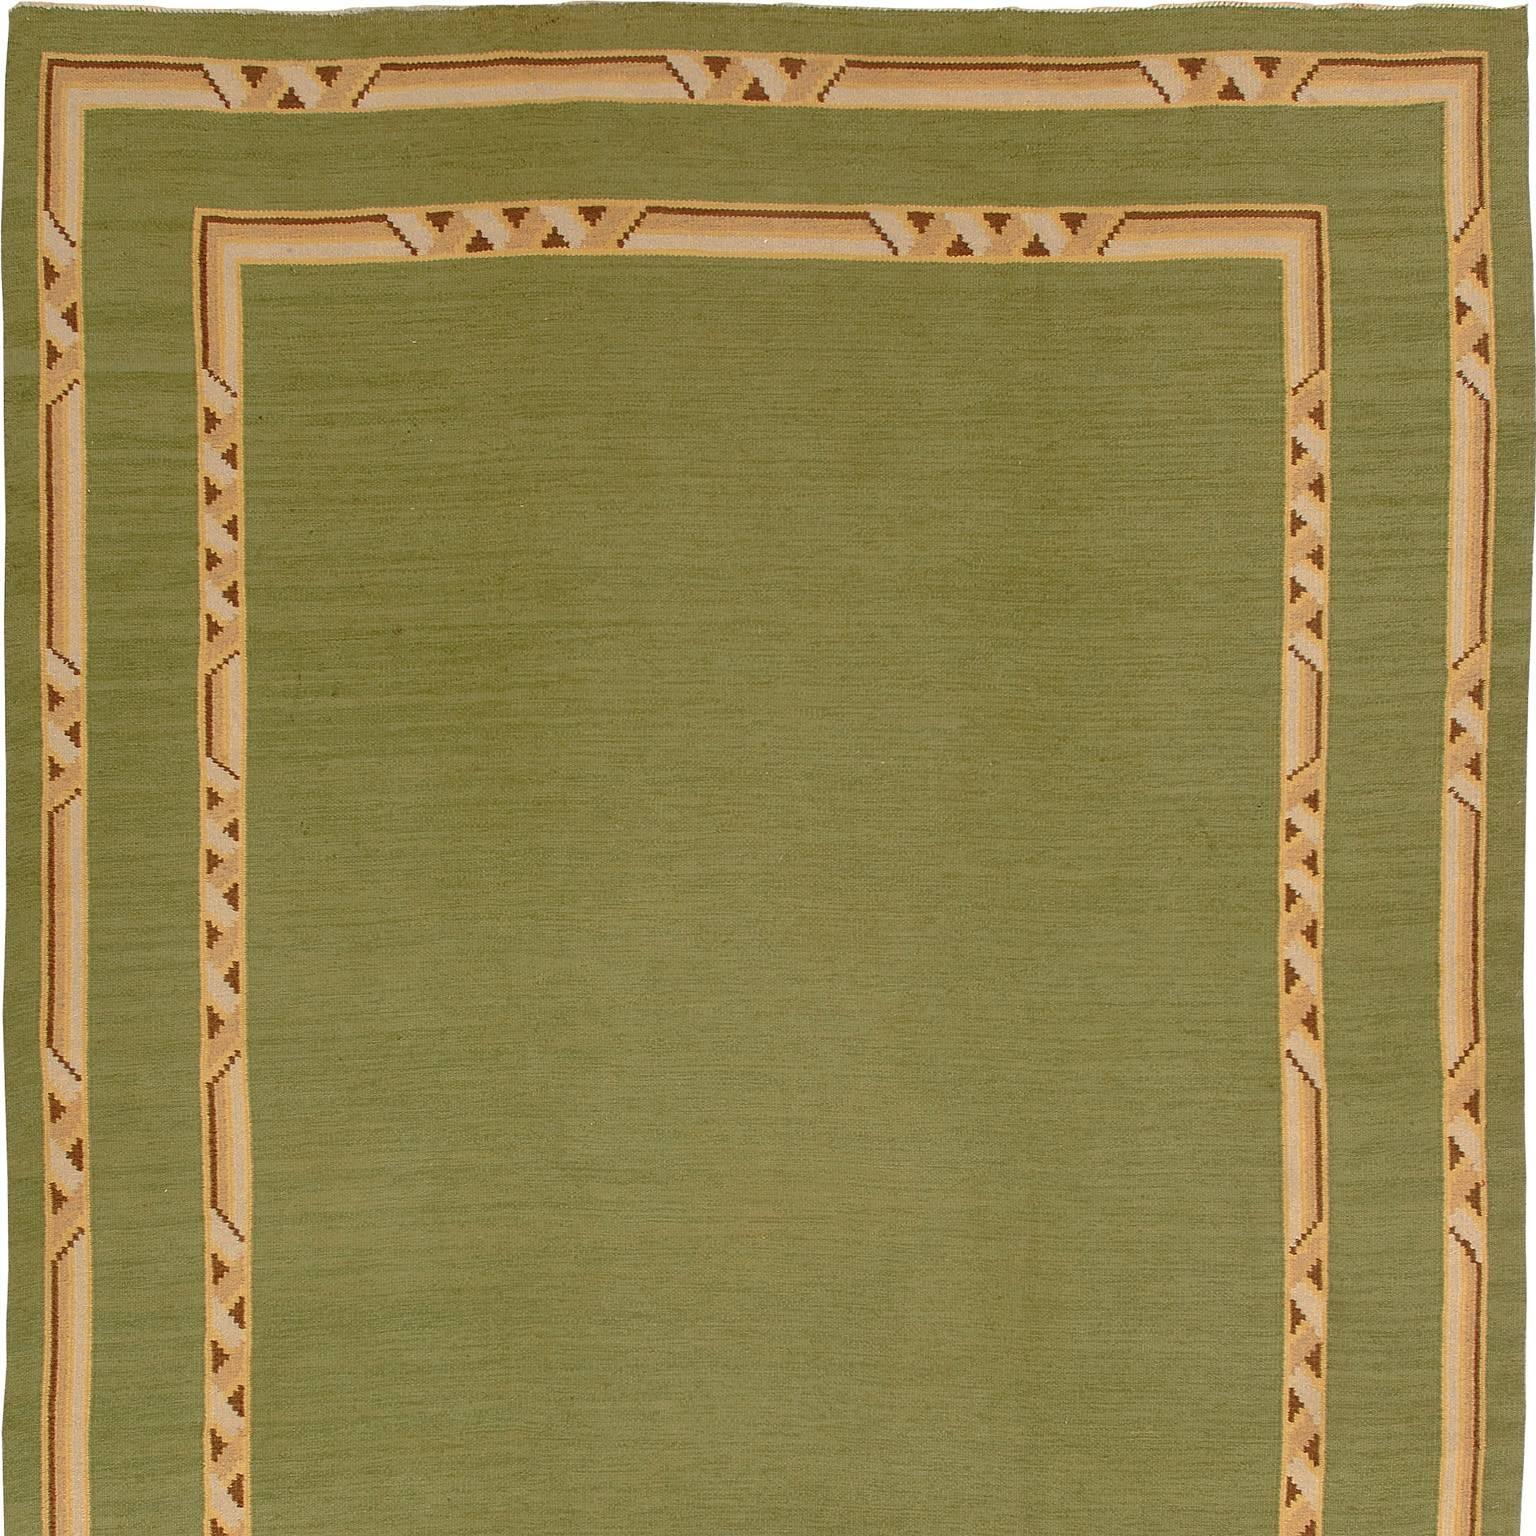 Early 20th Century Swedish Flat-Weave Carpet For Sale 2